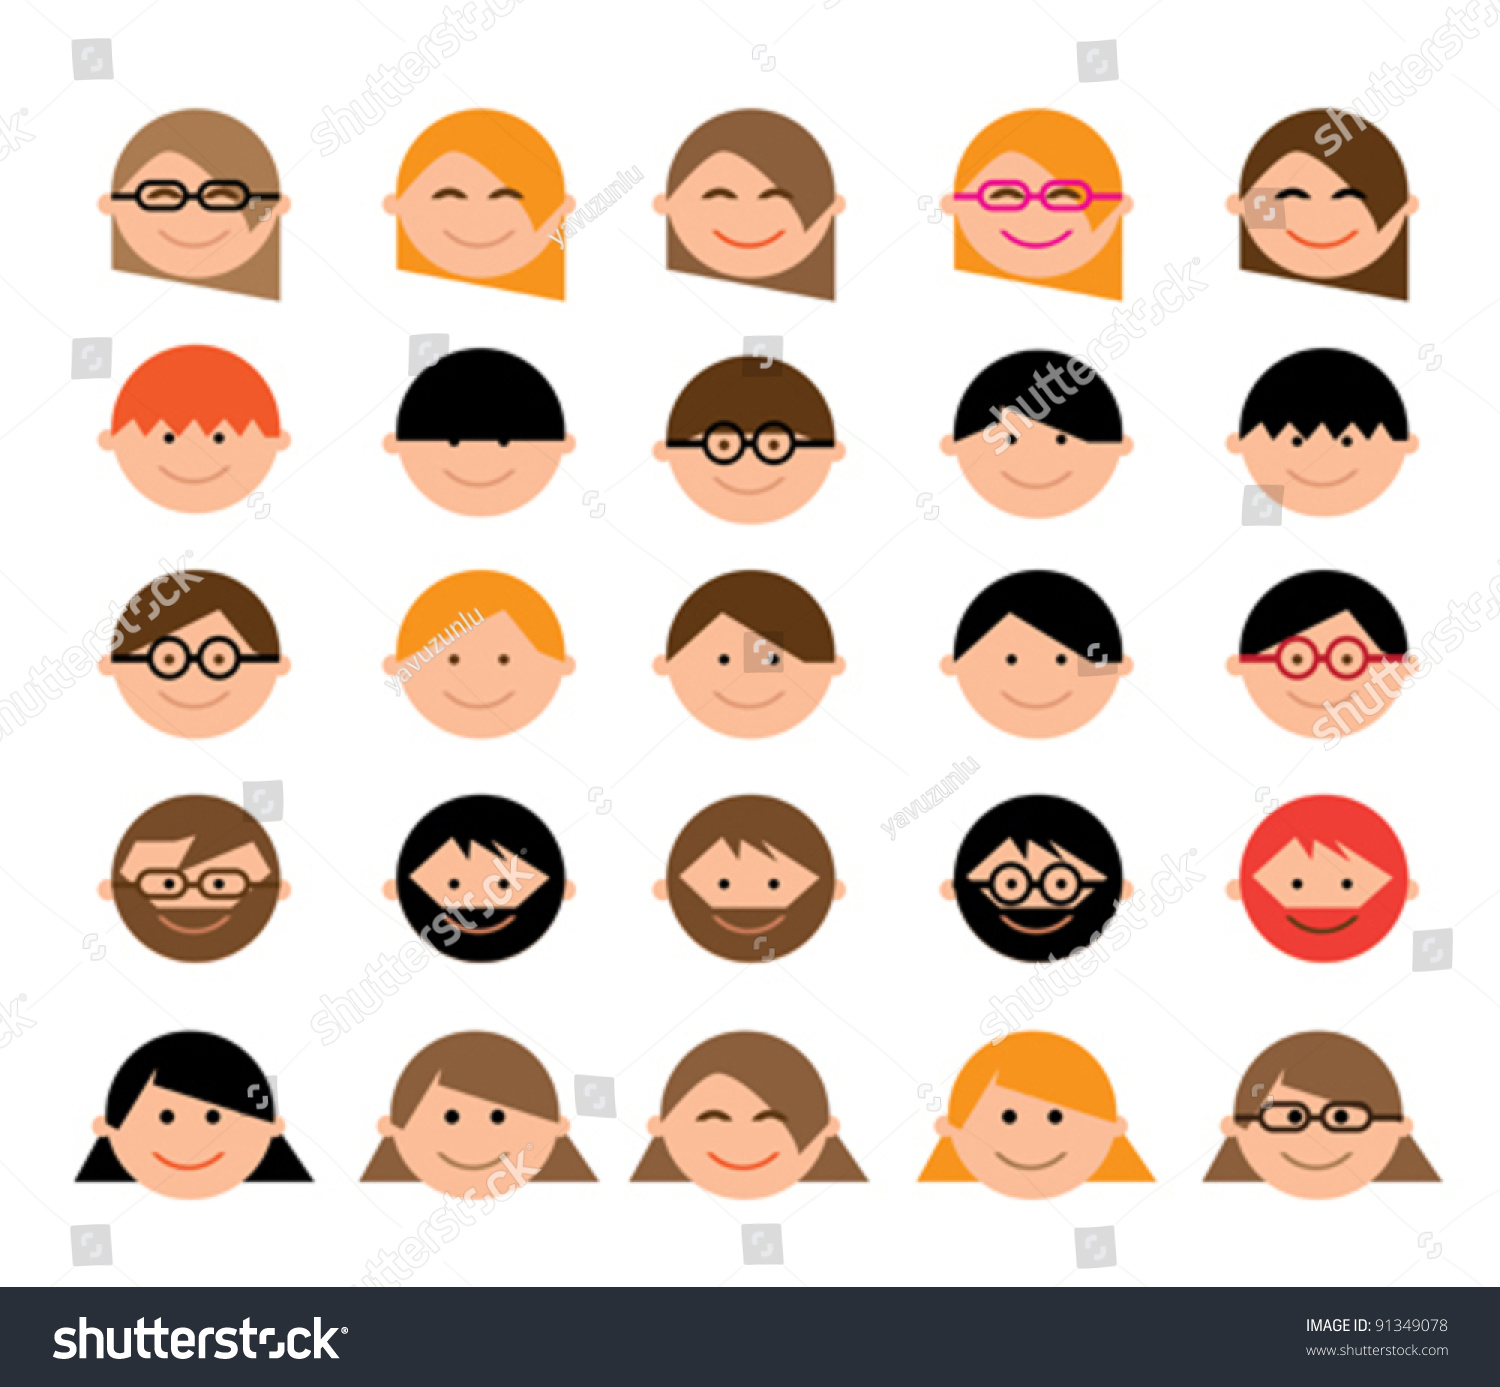 Featured image of post Cartoon Character Faces Images : Cartoon faces stock photos and images.